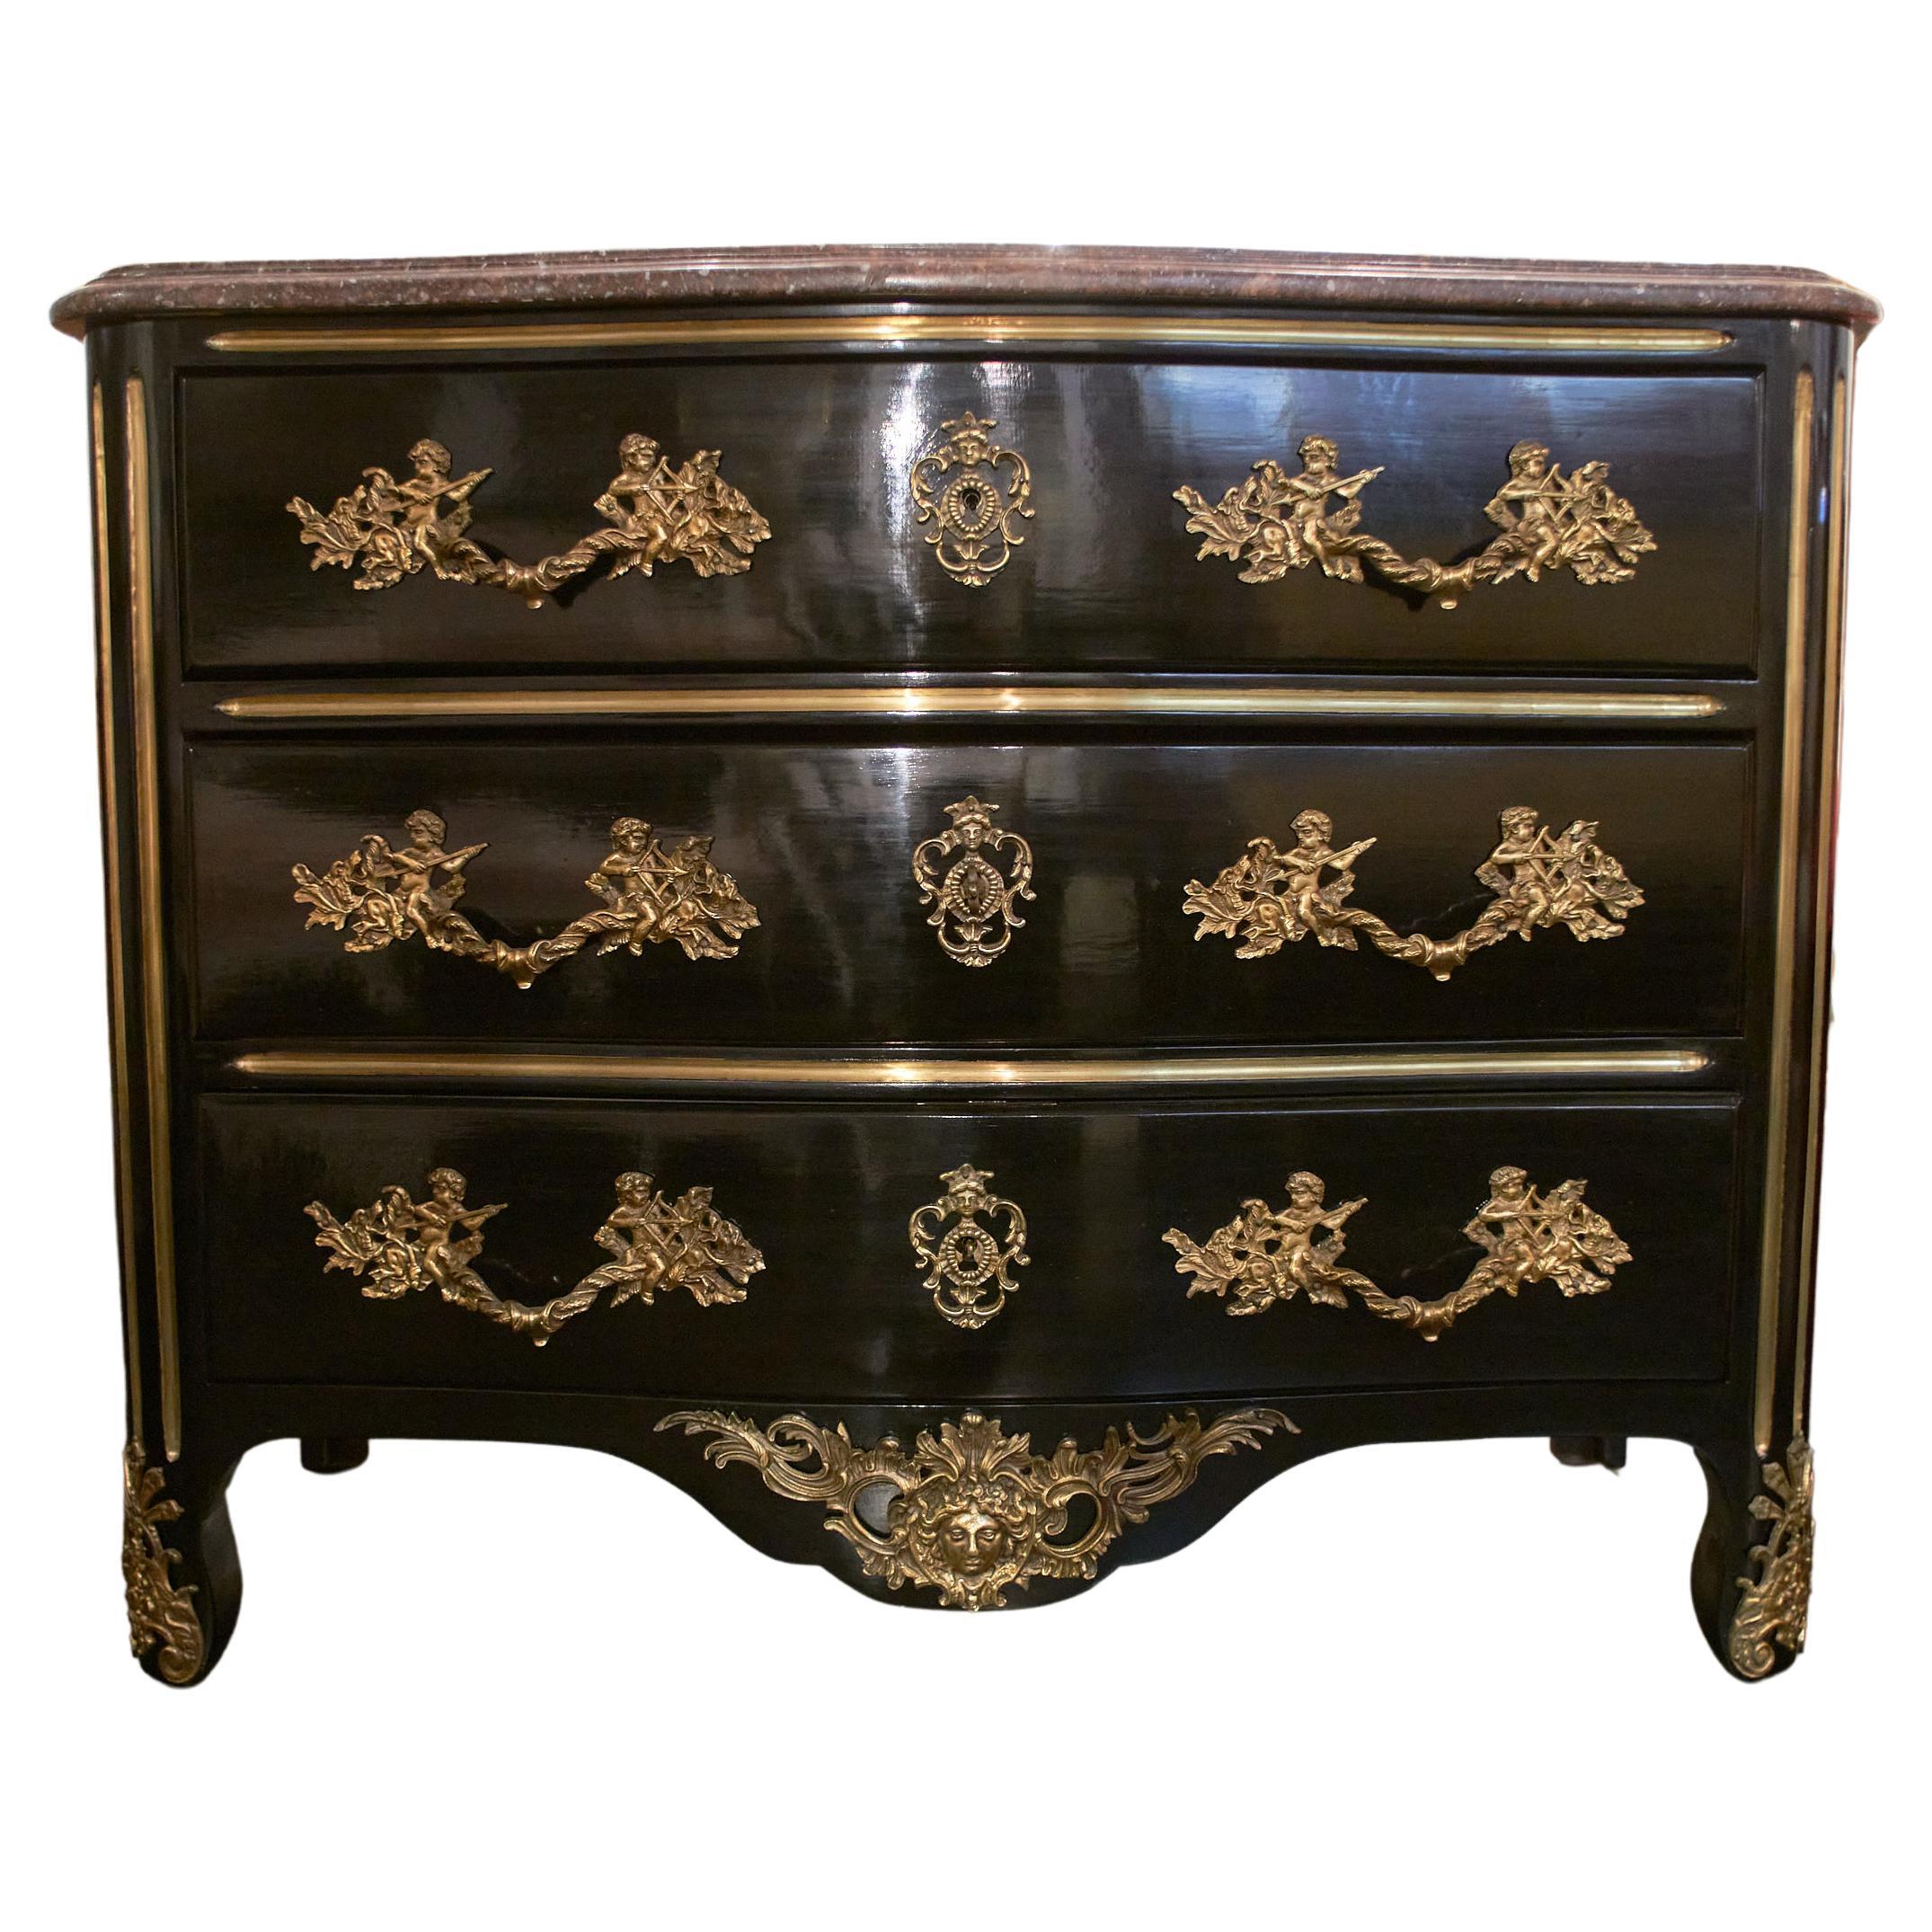 French Louis XVI Style Commode Dresser with Marble Top and Gilt Bronze Accents